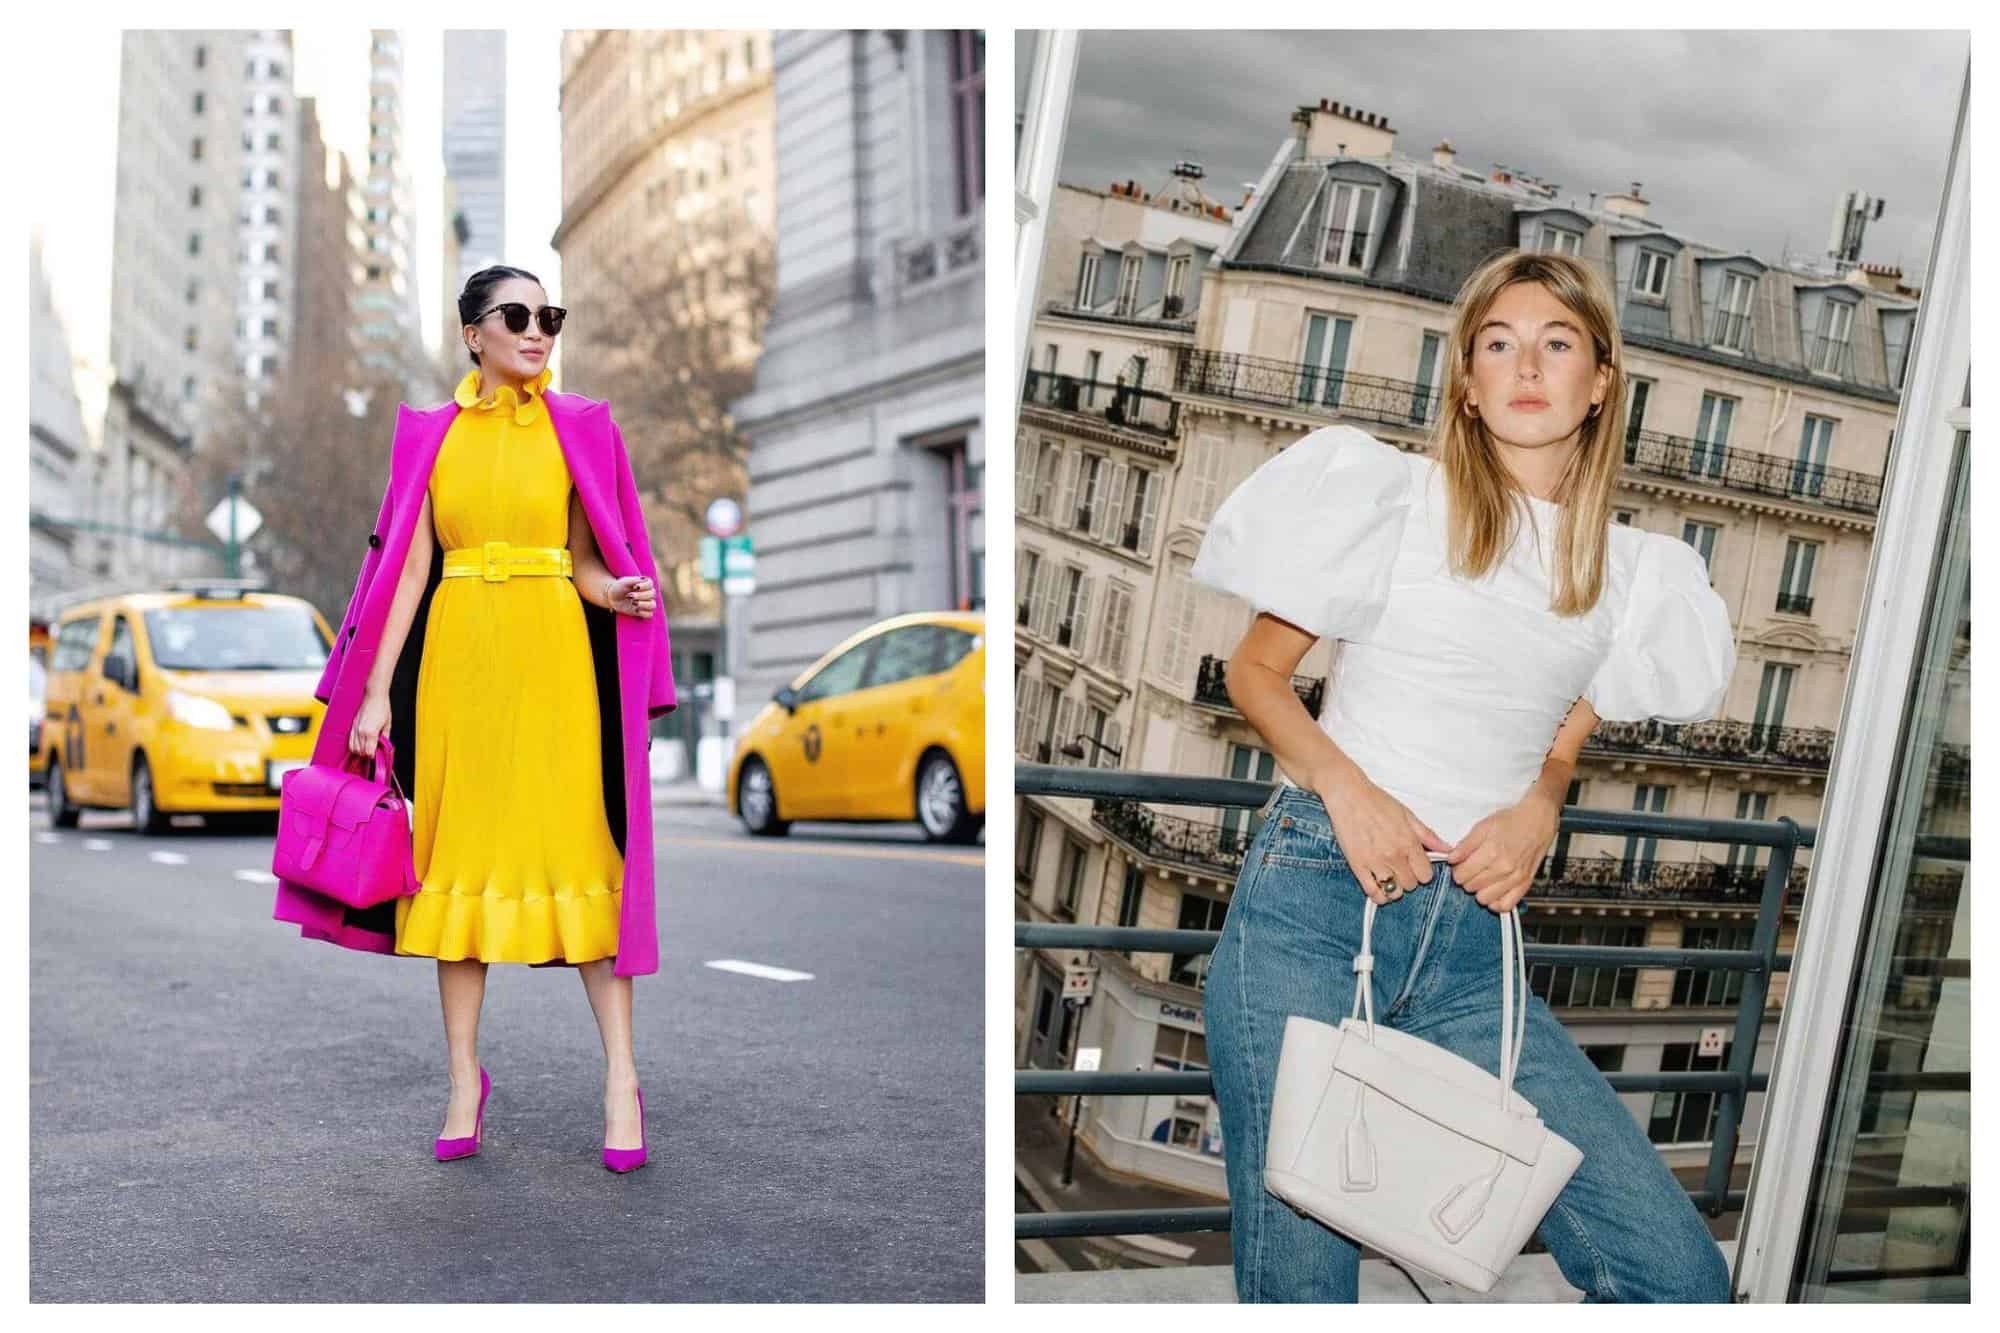 Left: Fashion blogger Wendy Nguyen is standing in an avenue in NYC with 2 iconic yellow cabs behind her. She is seen sporting a color blocked ensemble -- fuschia pink long coat, bag and stilettos paired with a bright yellow dress. The yellow dress has a ruffled collar and the hemline hits just a little above her calves. It is secured by a belt in her waist that is bright yellow as well. Right: Fashion blogger Camille Charriere is posing in a Parisian balcony with a background of another Haussmannian building. She is wearing a white top with mutton sleeves, a pair of denim jeans and a white Givenchy bag.